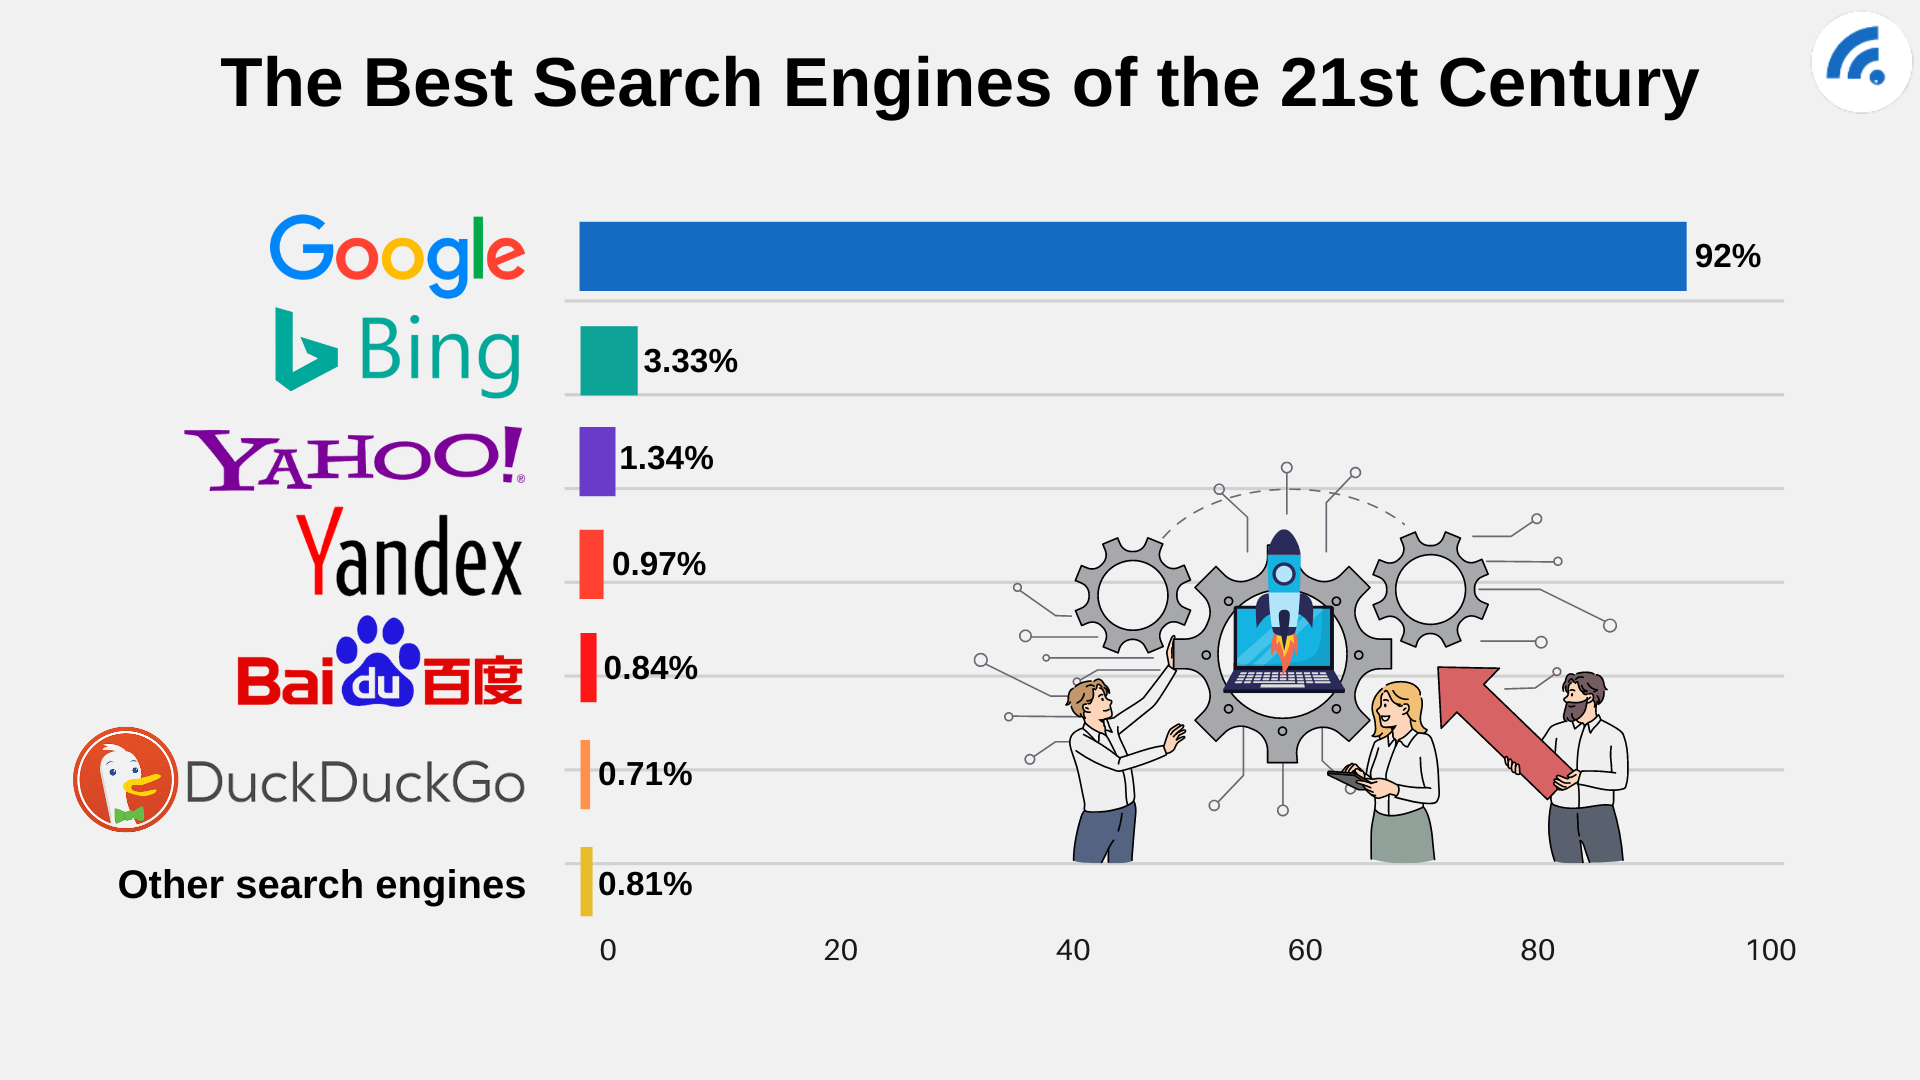 Is Google actually the best search engine?